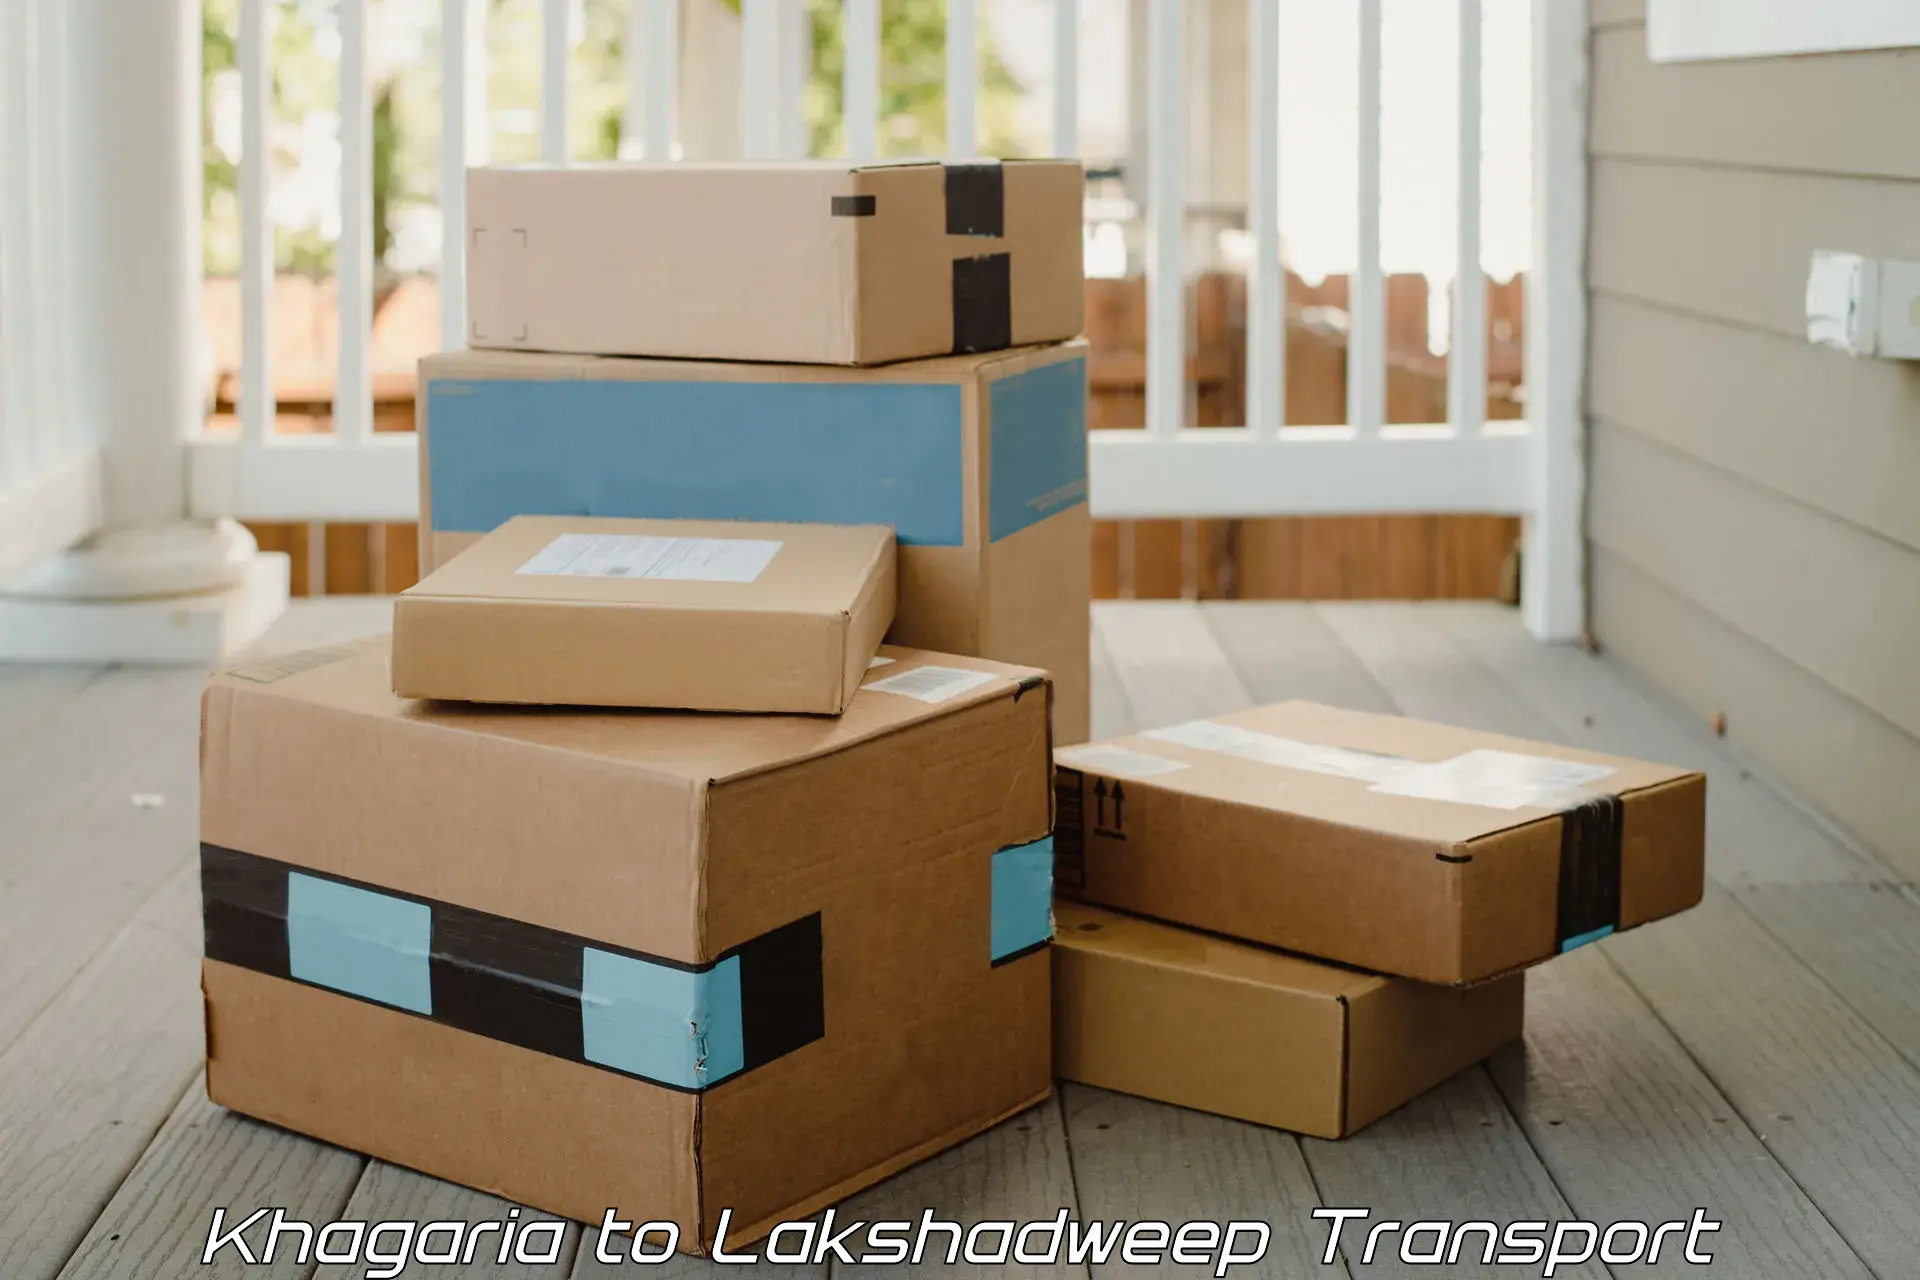 Online transport service in Khagaria to Lakshadweep